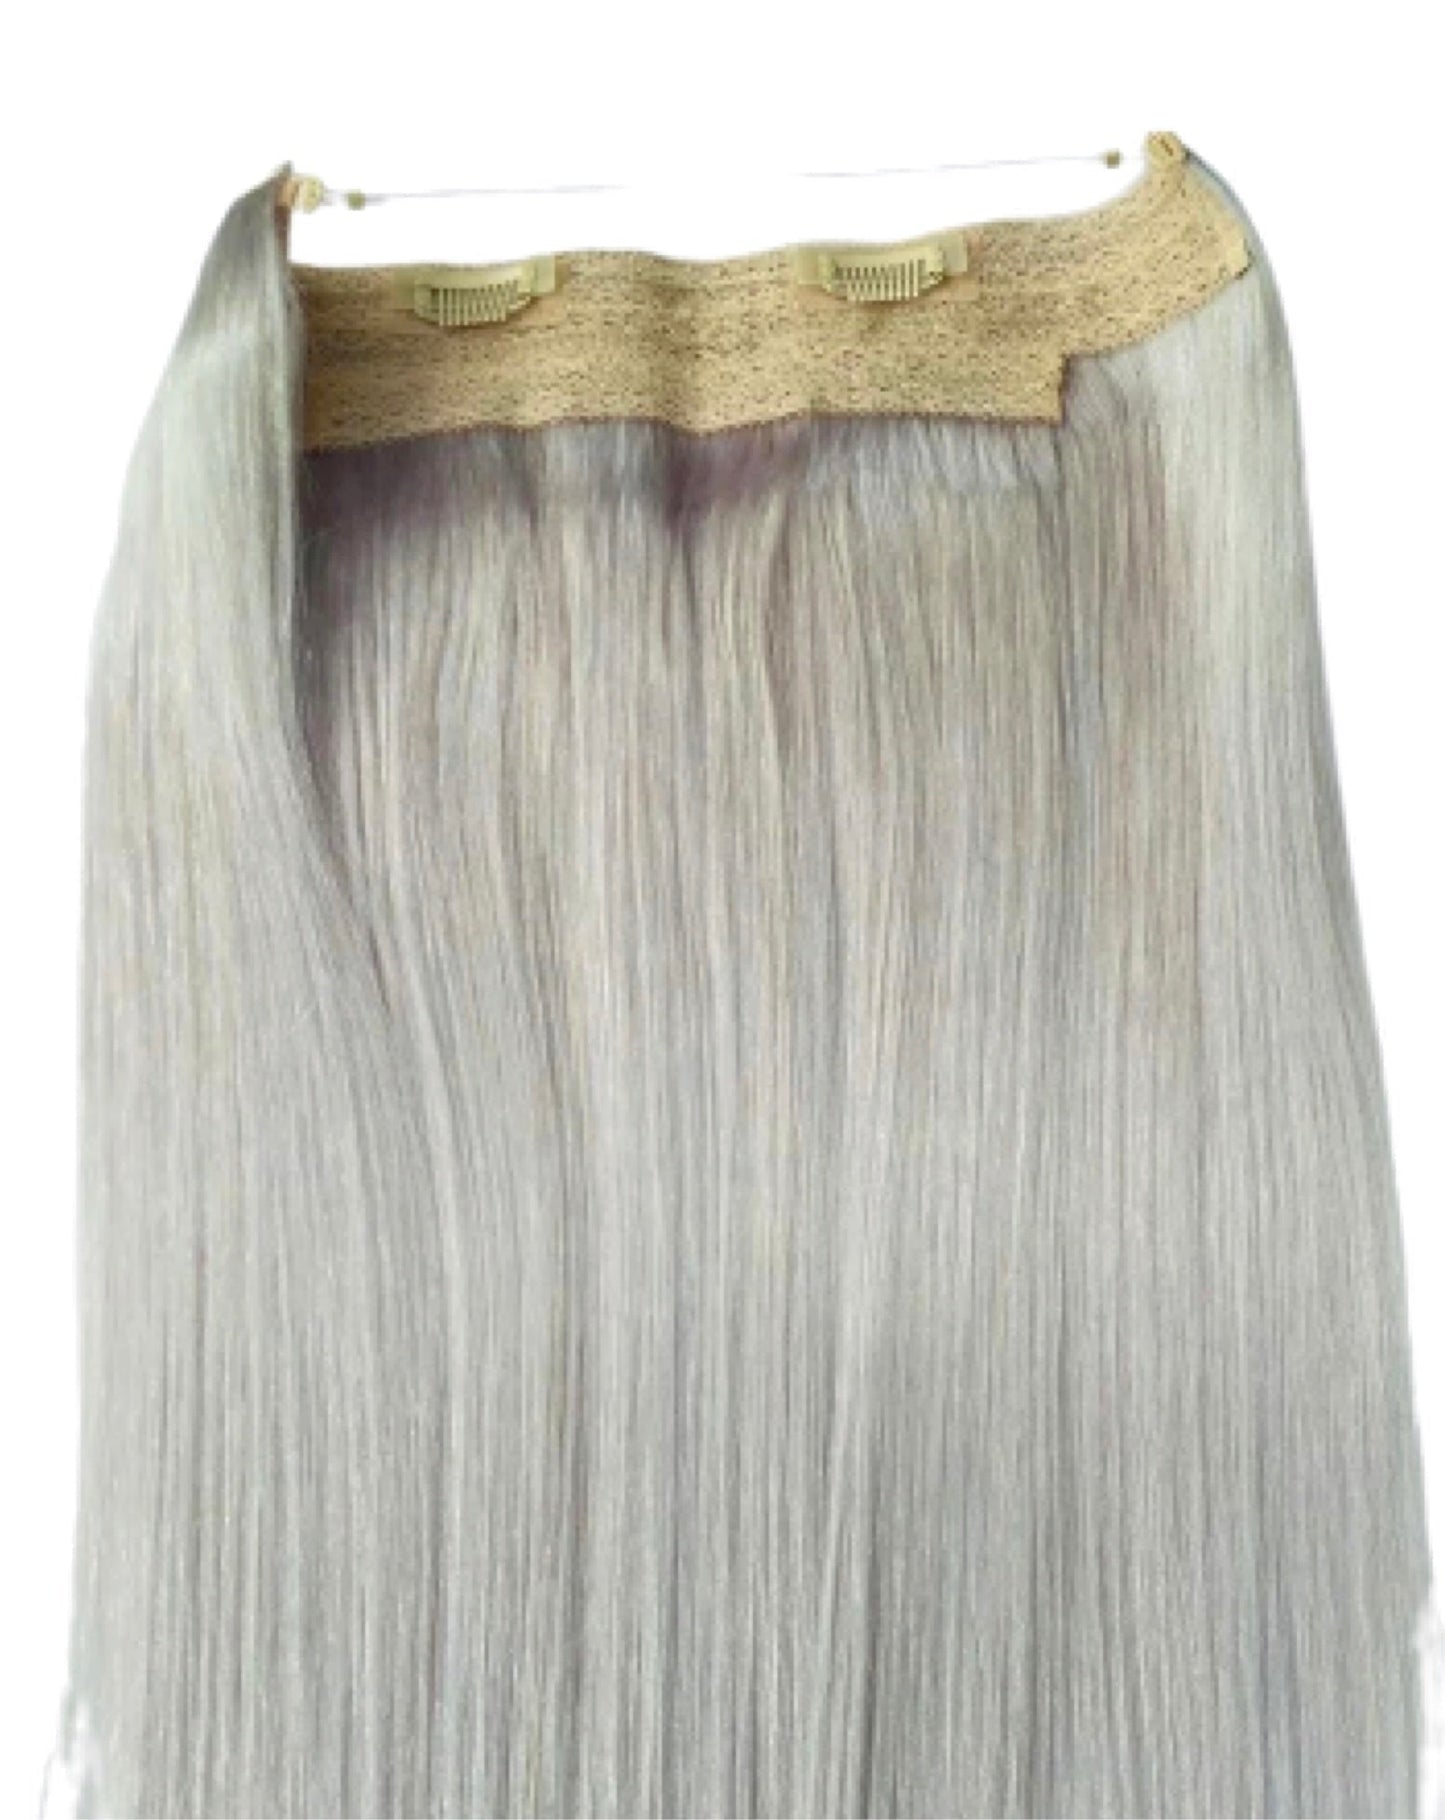 RETAIL HALO EXTENSIONS - HIGHLIGHTED - PARISIAN BLONDE